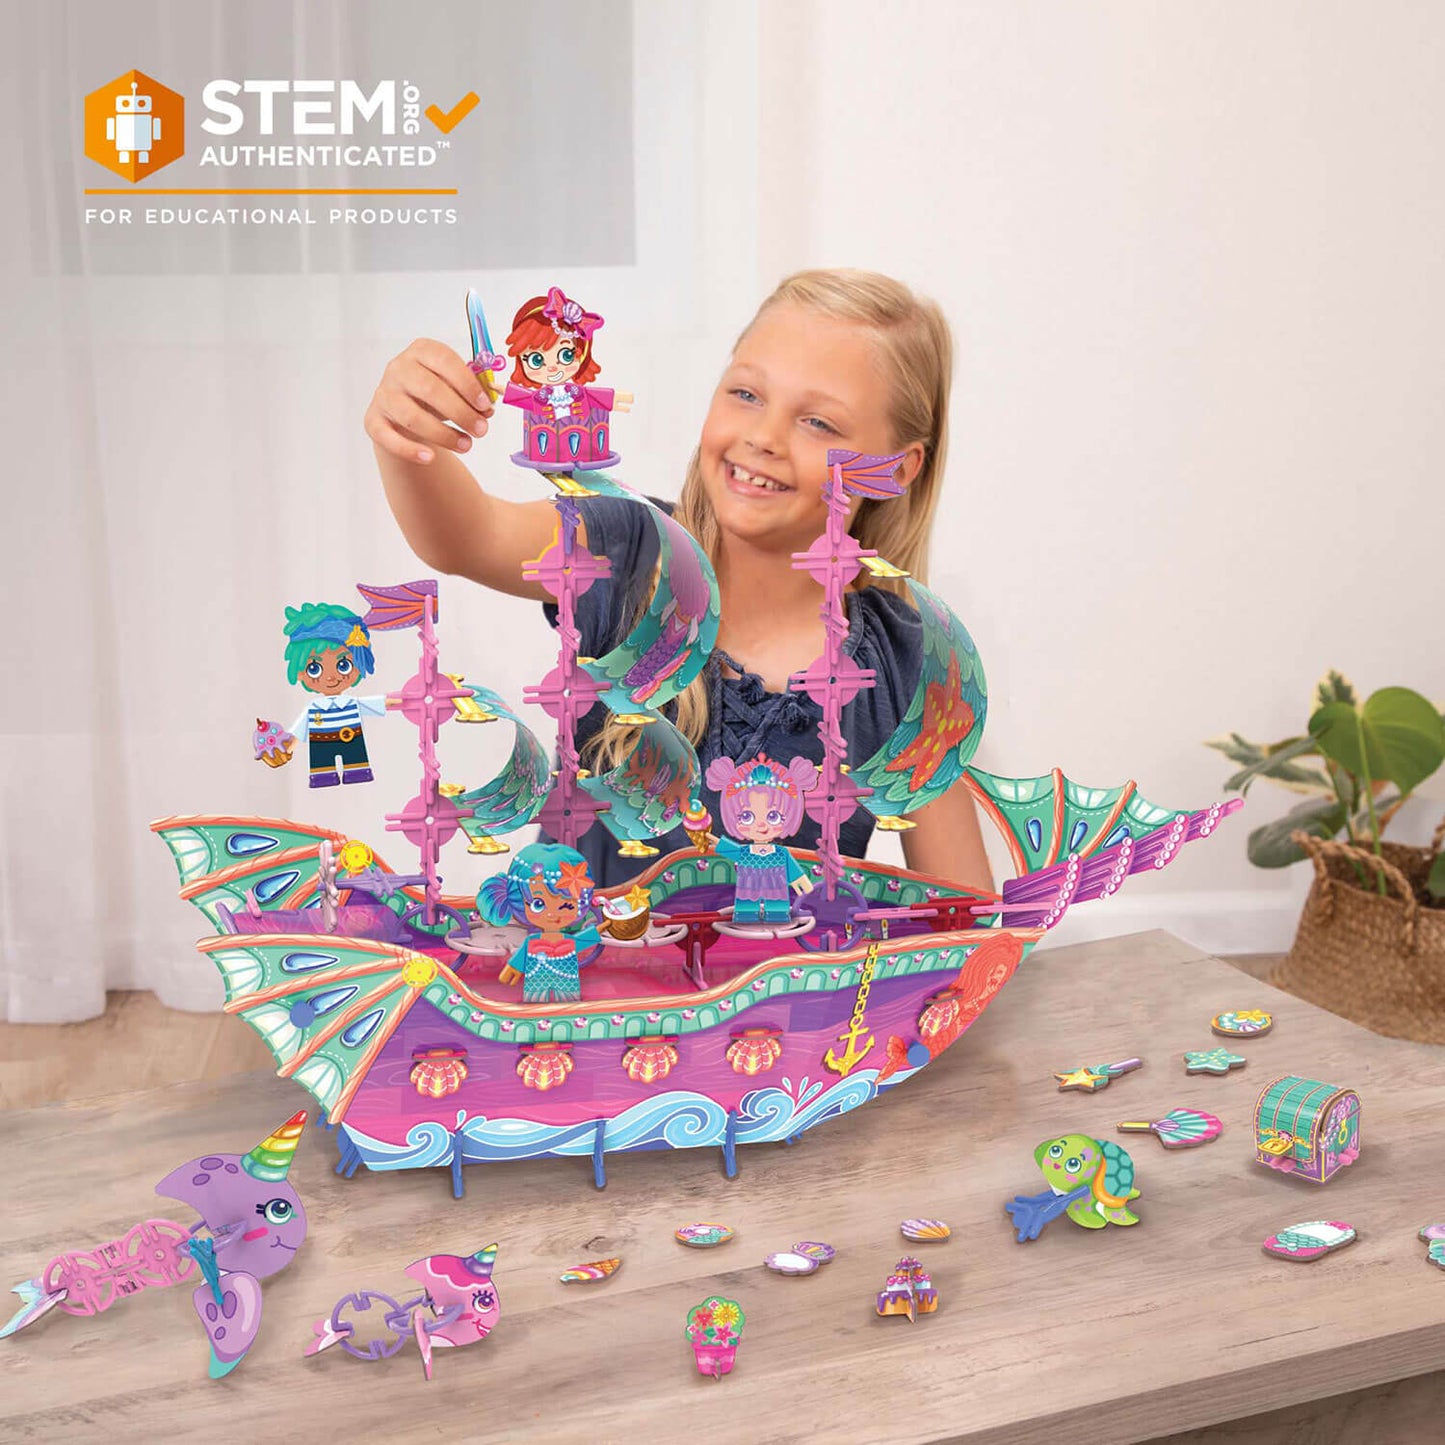 Pinxies Marvelous Mermaid Ship is a STEM authenticated building set for ages 6+